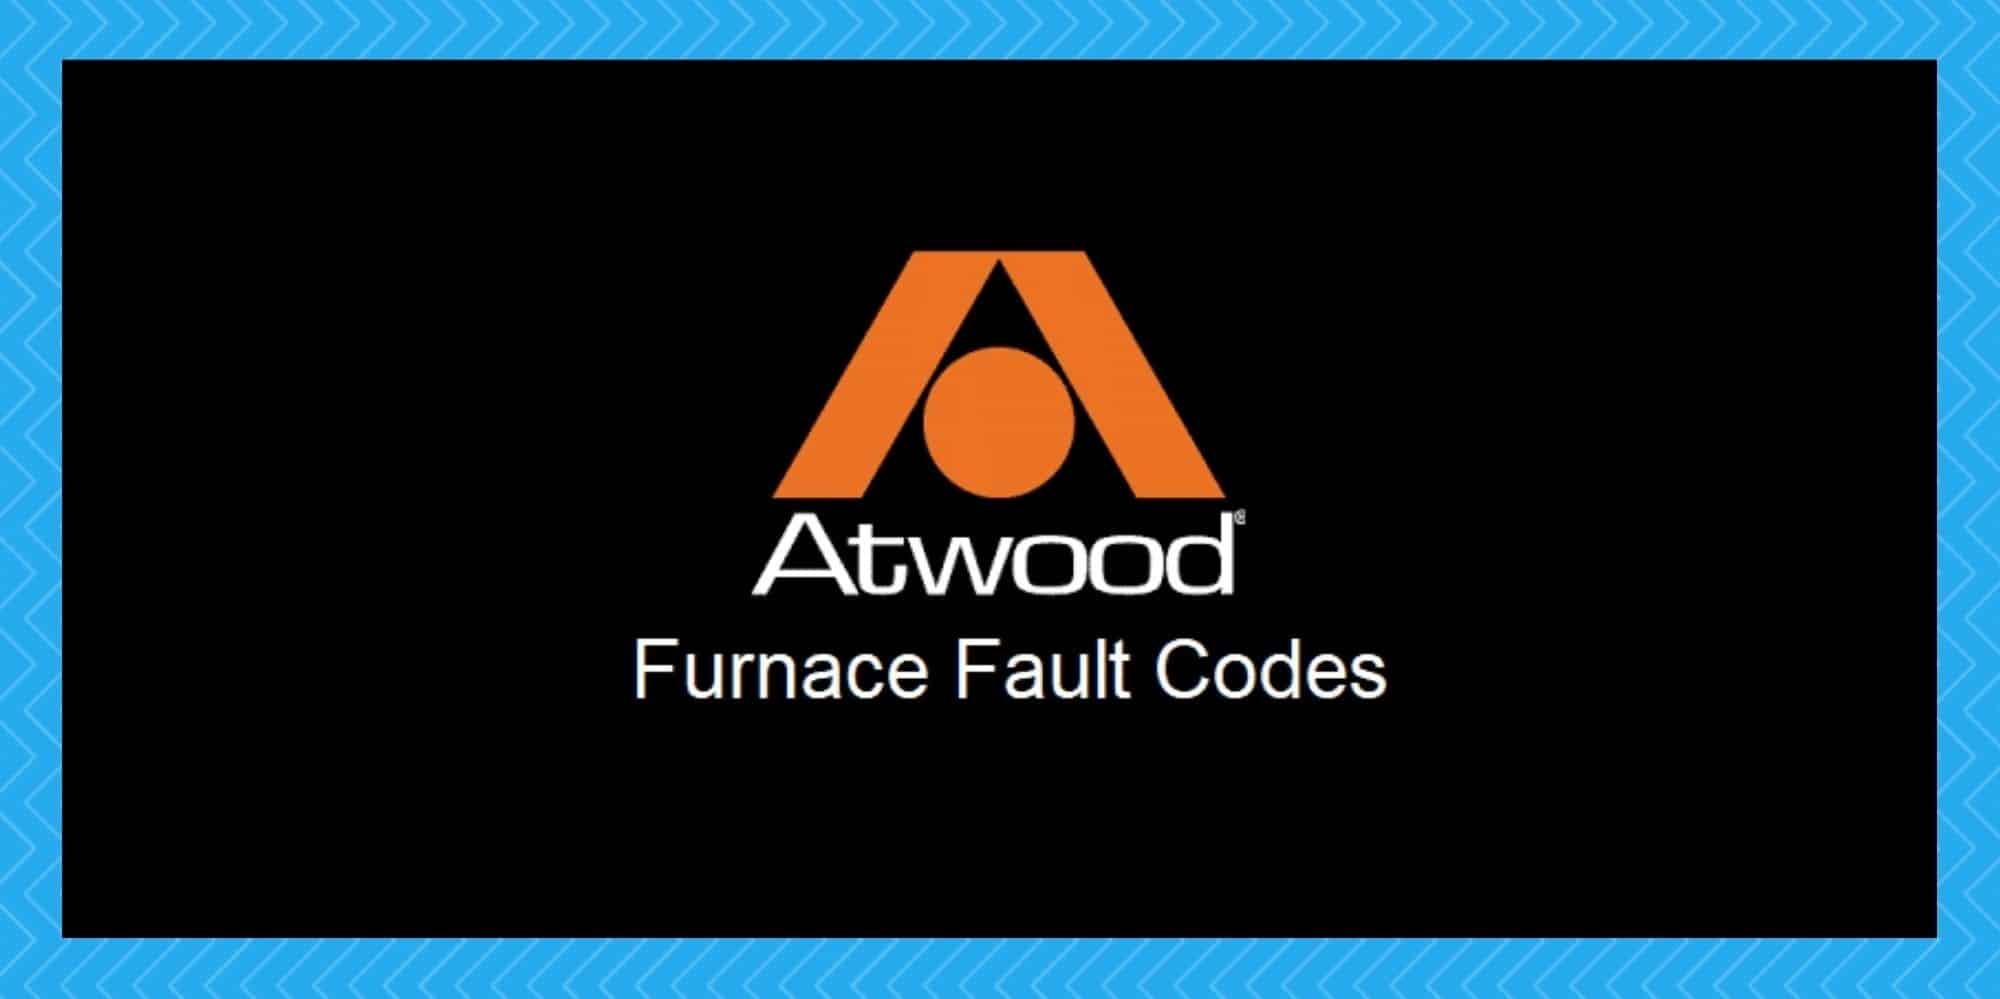 atwood furnace fault codes